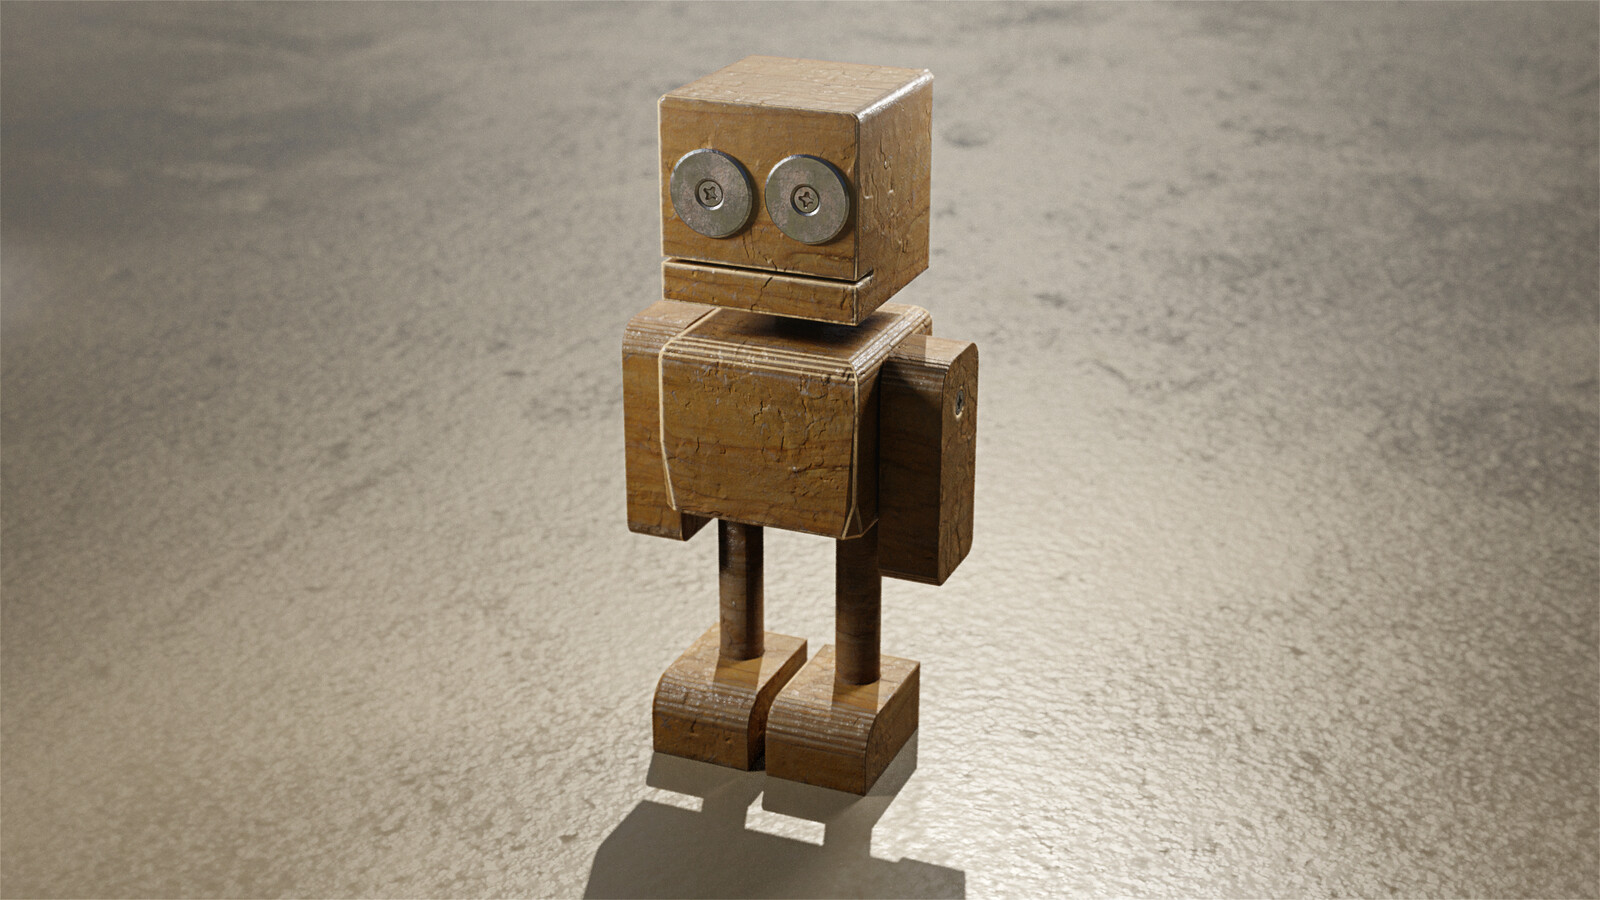 Wooden Robot - made for a challenge